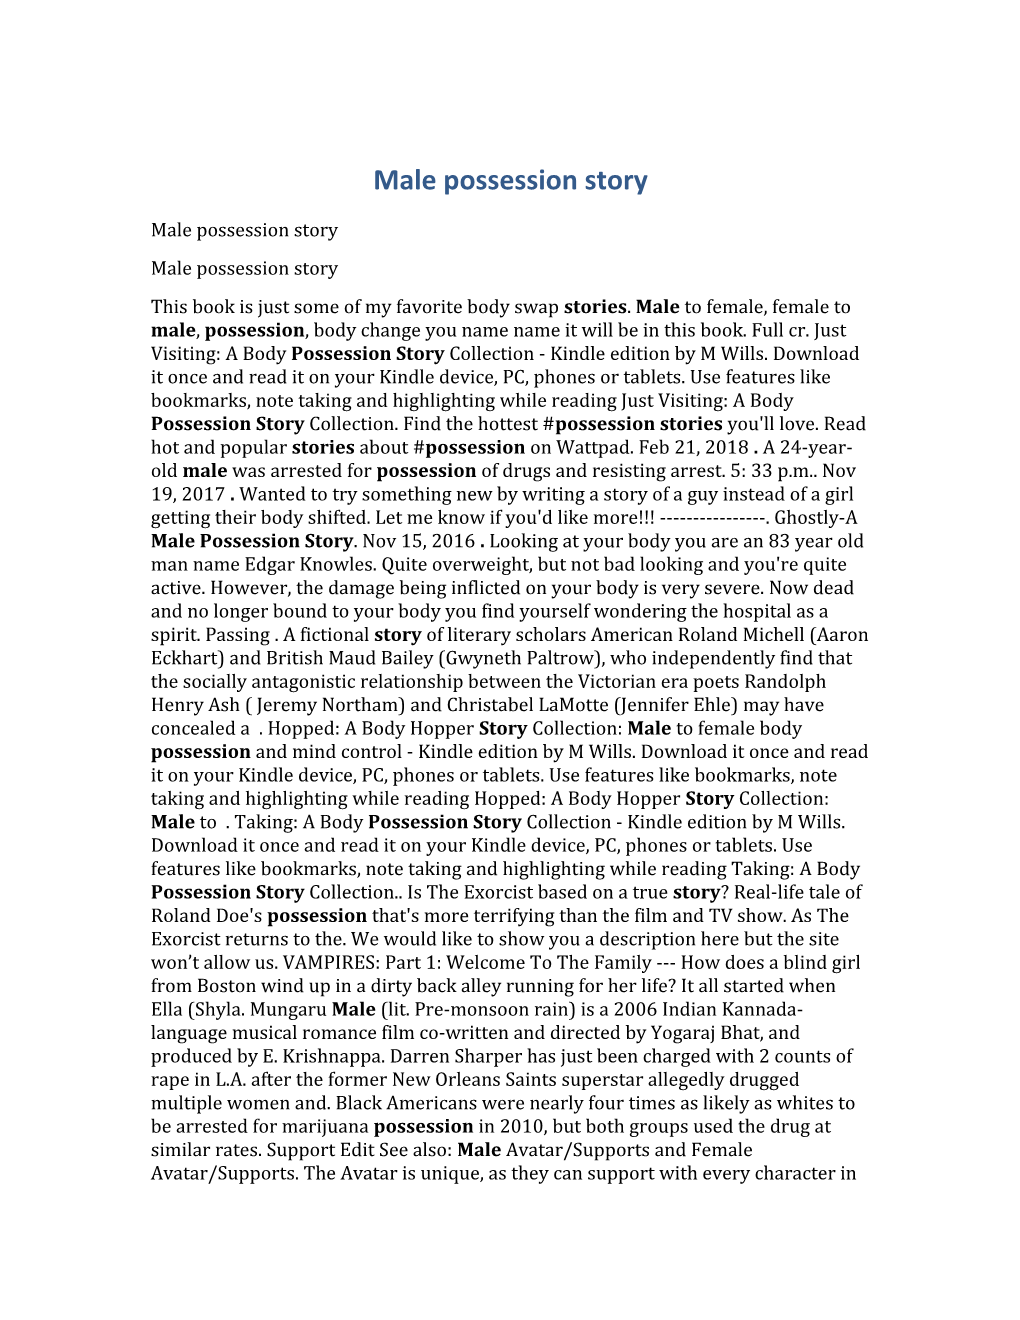 Male Possession Story